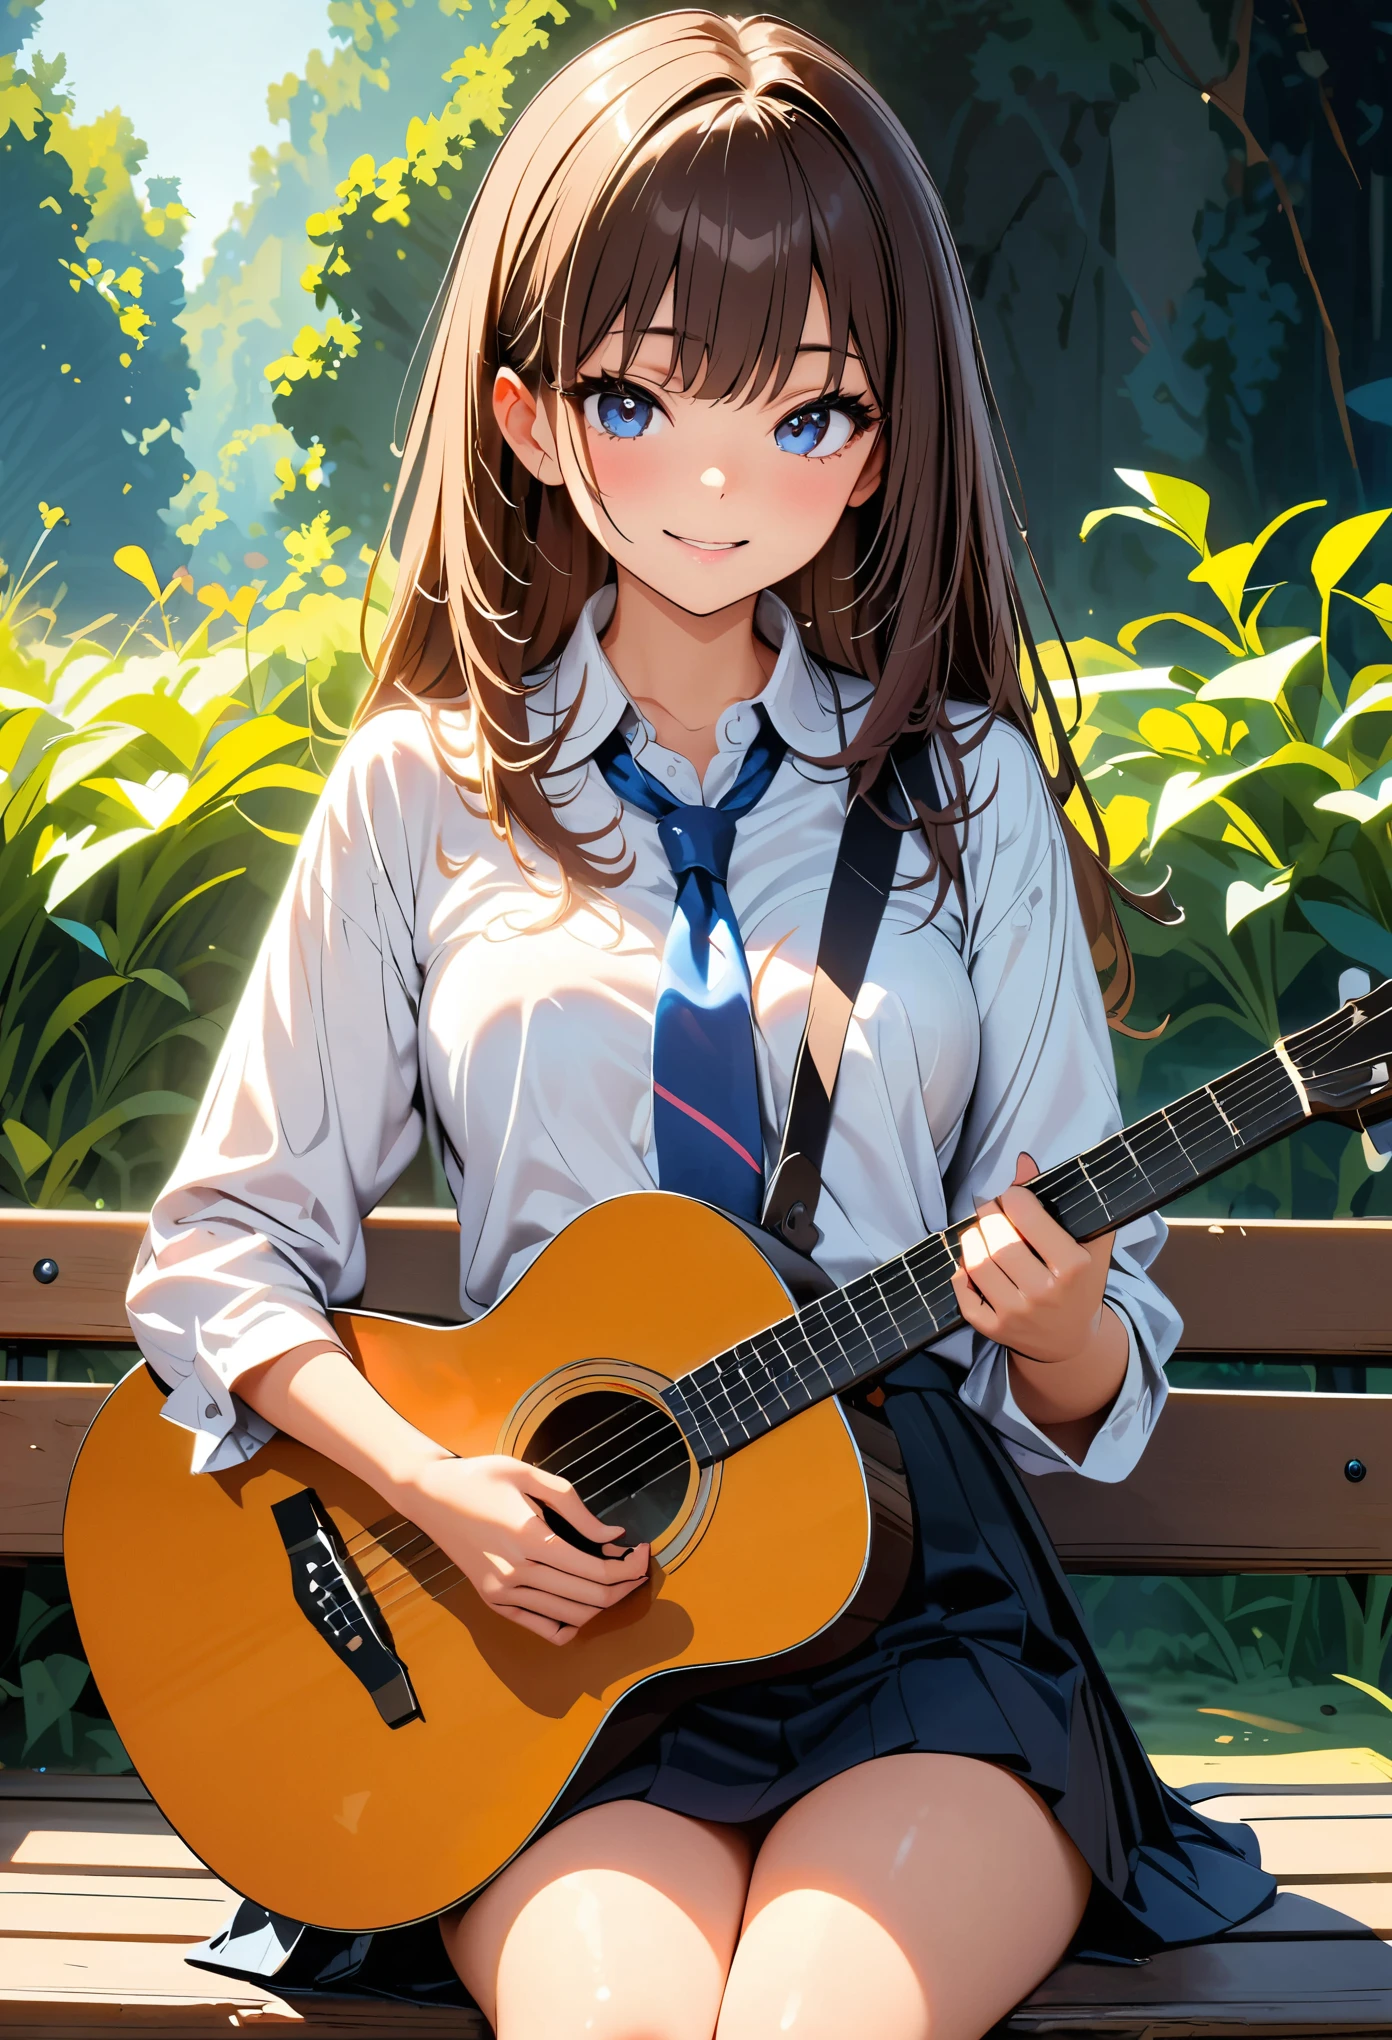 (high quality, 8K, 4K, High Contrast, masterpiece:1.2, 最high quality, Best aesthetics), ((1 female)), Beautiful school girl playing guitar, JK, Beautiful detailed eyes, Beautiful detailed lips, Highly Detailed Face and Portrait, uniform, shirt, Blue tie, Loose tie, Long brown hair, Detailed face, Smiling expression, Sitting on a garden bench, wood々Sunlight flowing between, Fine Art Digital Painting, HDR, Bright colors, Soft lighting, Natural light.